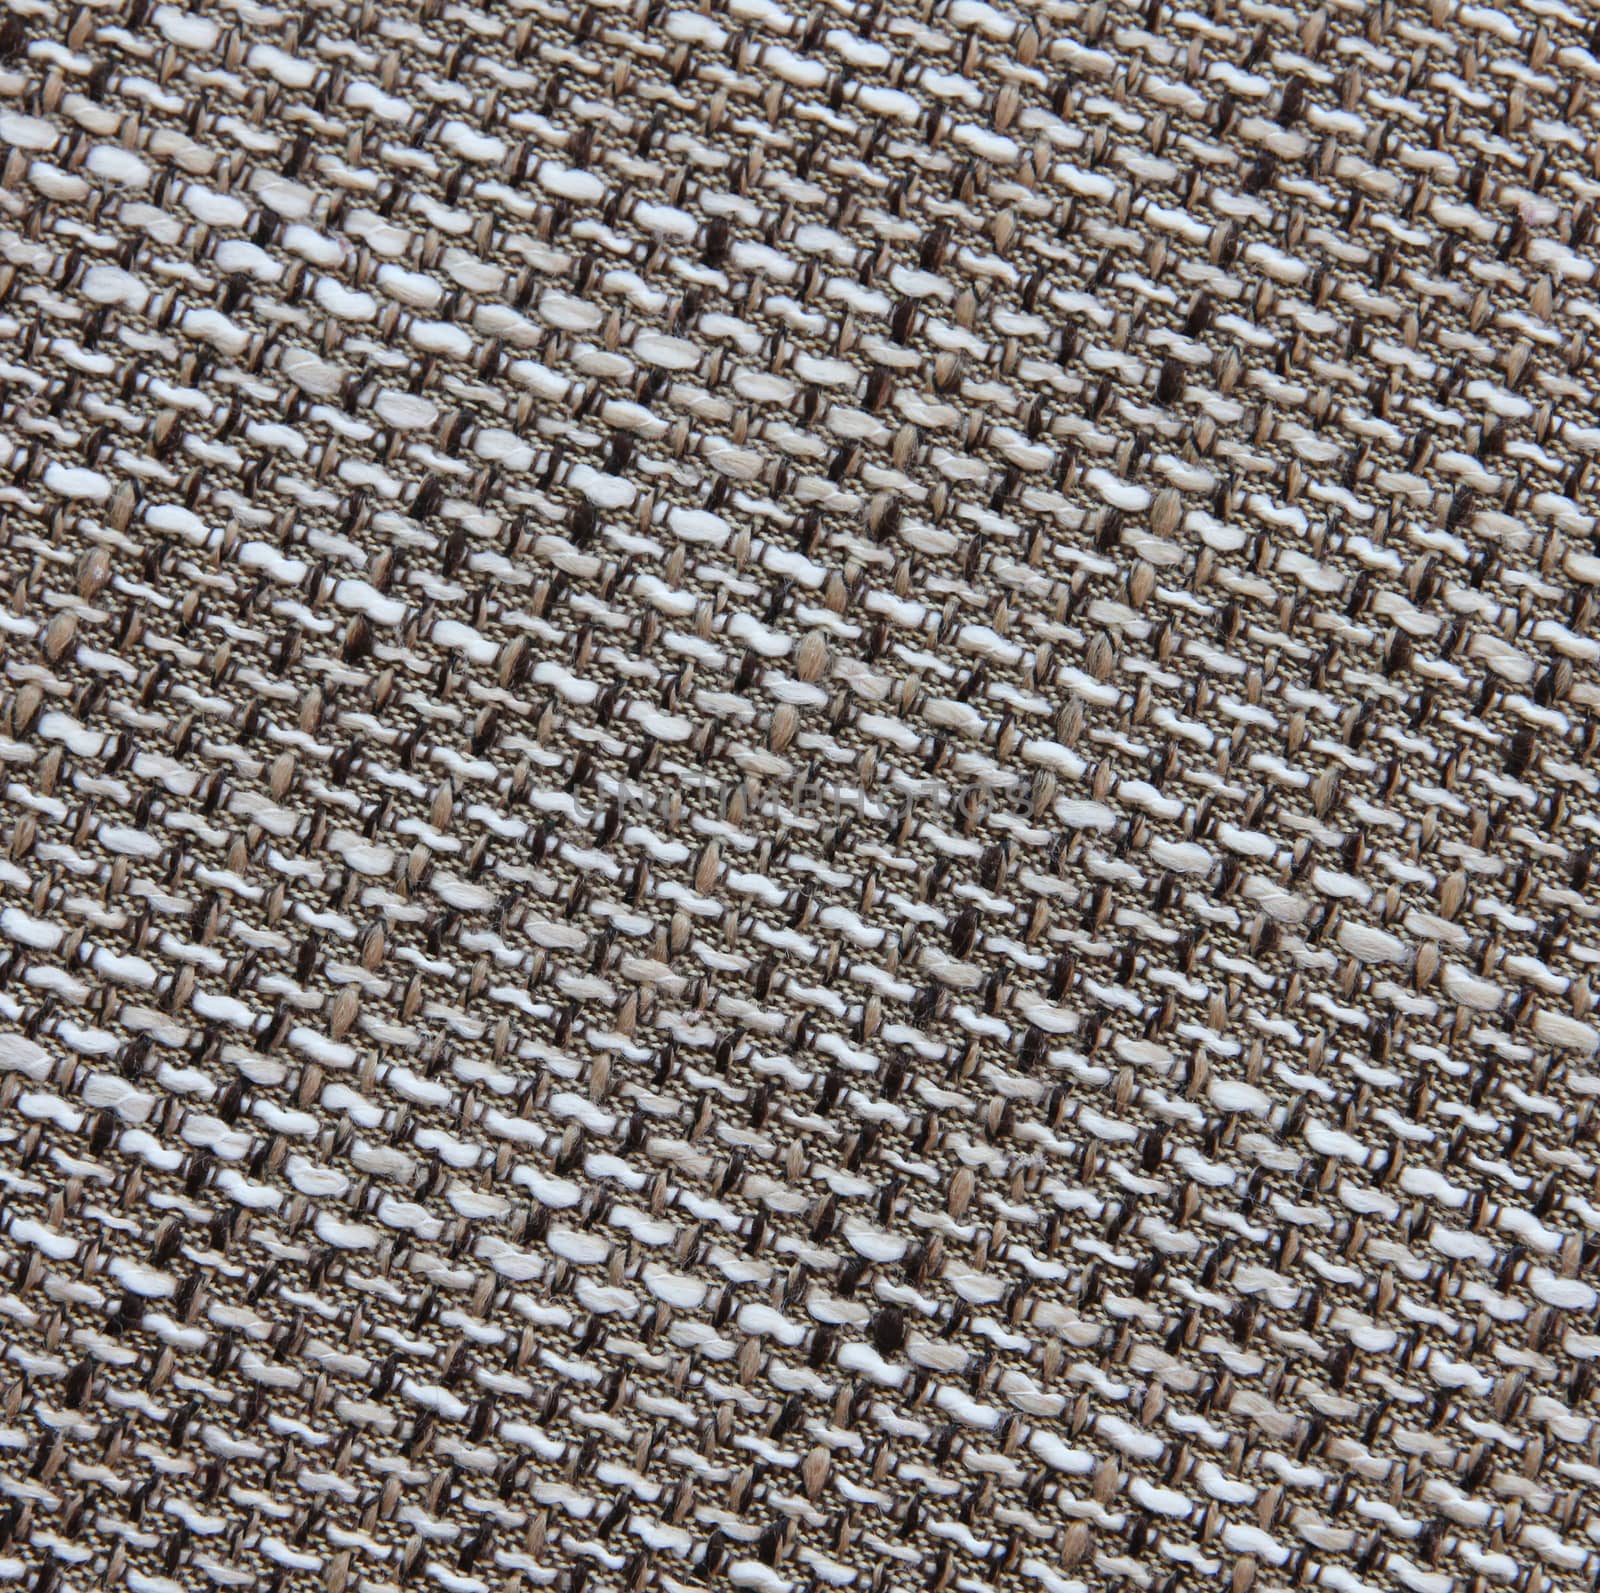 Furniture upholstery fabric can use as background. Abstract texture 